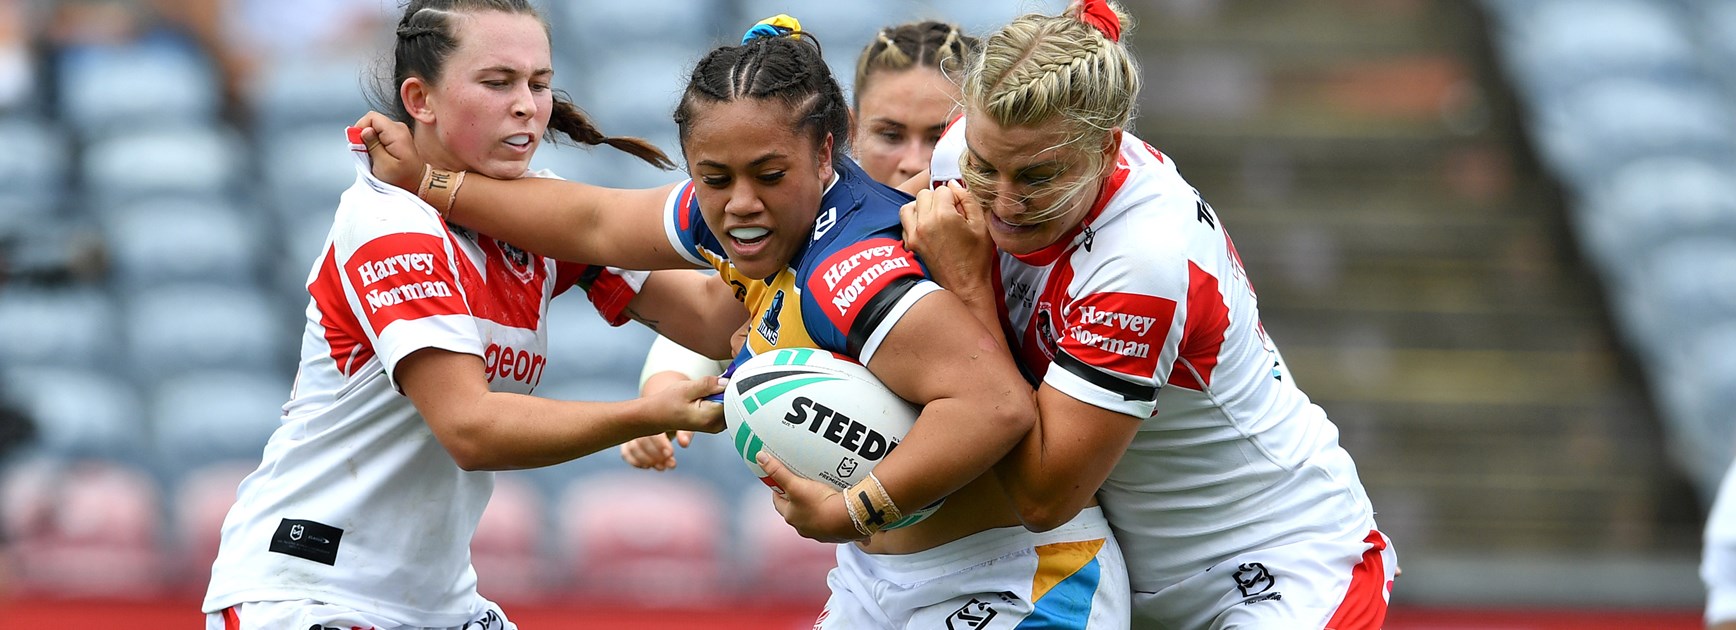 ‘Only going to go up from here’: Ball security the focus for Round 2 NRLW clash